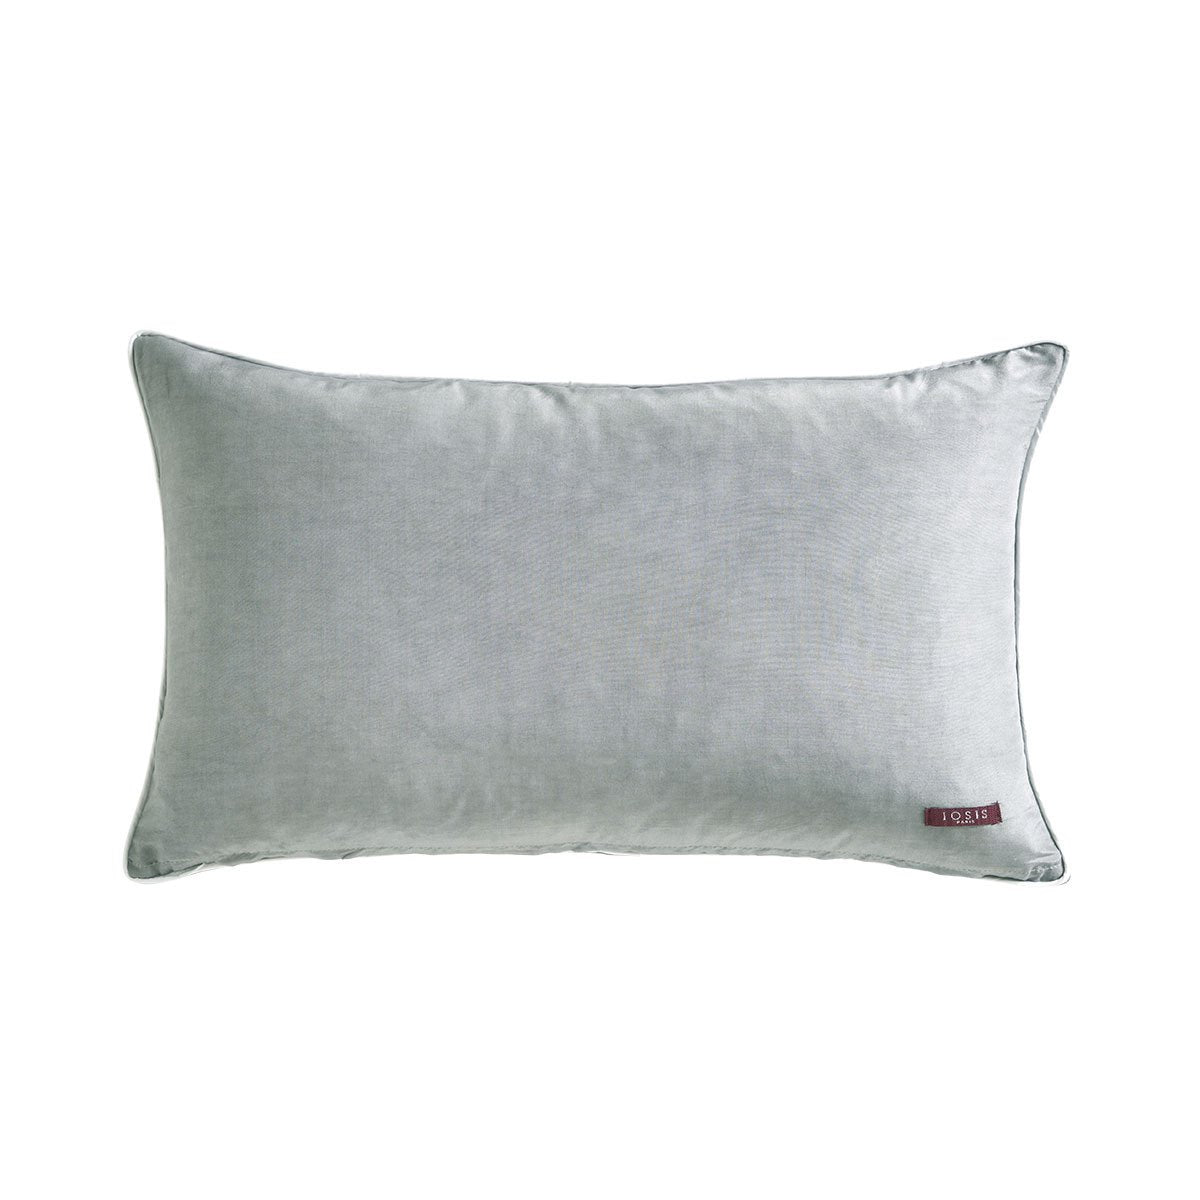 Yves Delorme Lubie Argent Accent Pillow